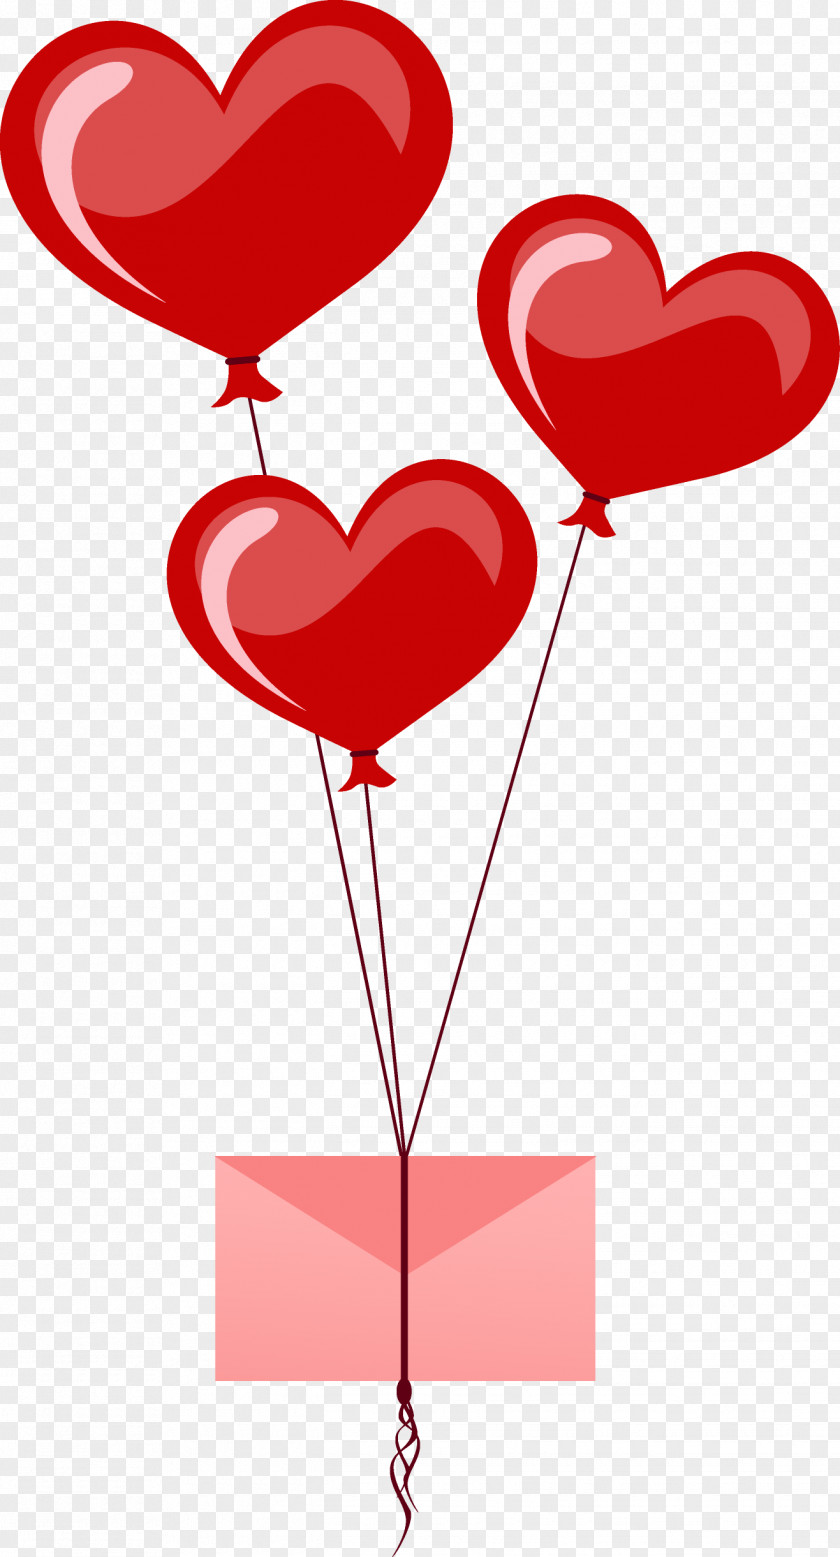 Balloon Heart Valentine's Day Clip Art PNG